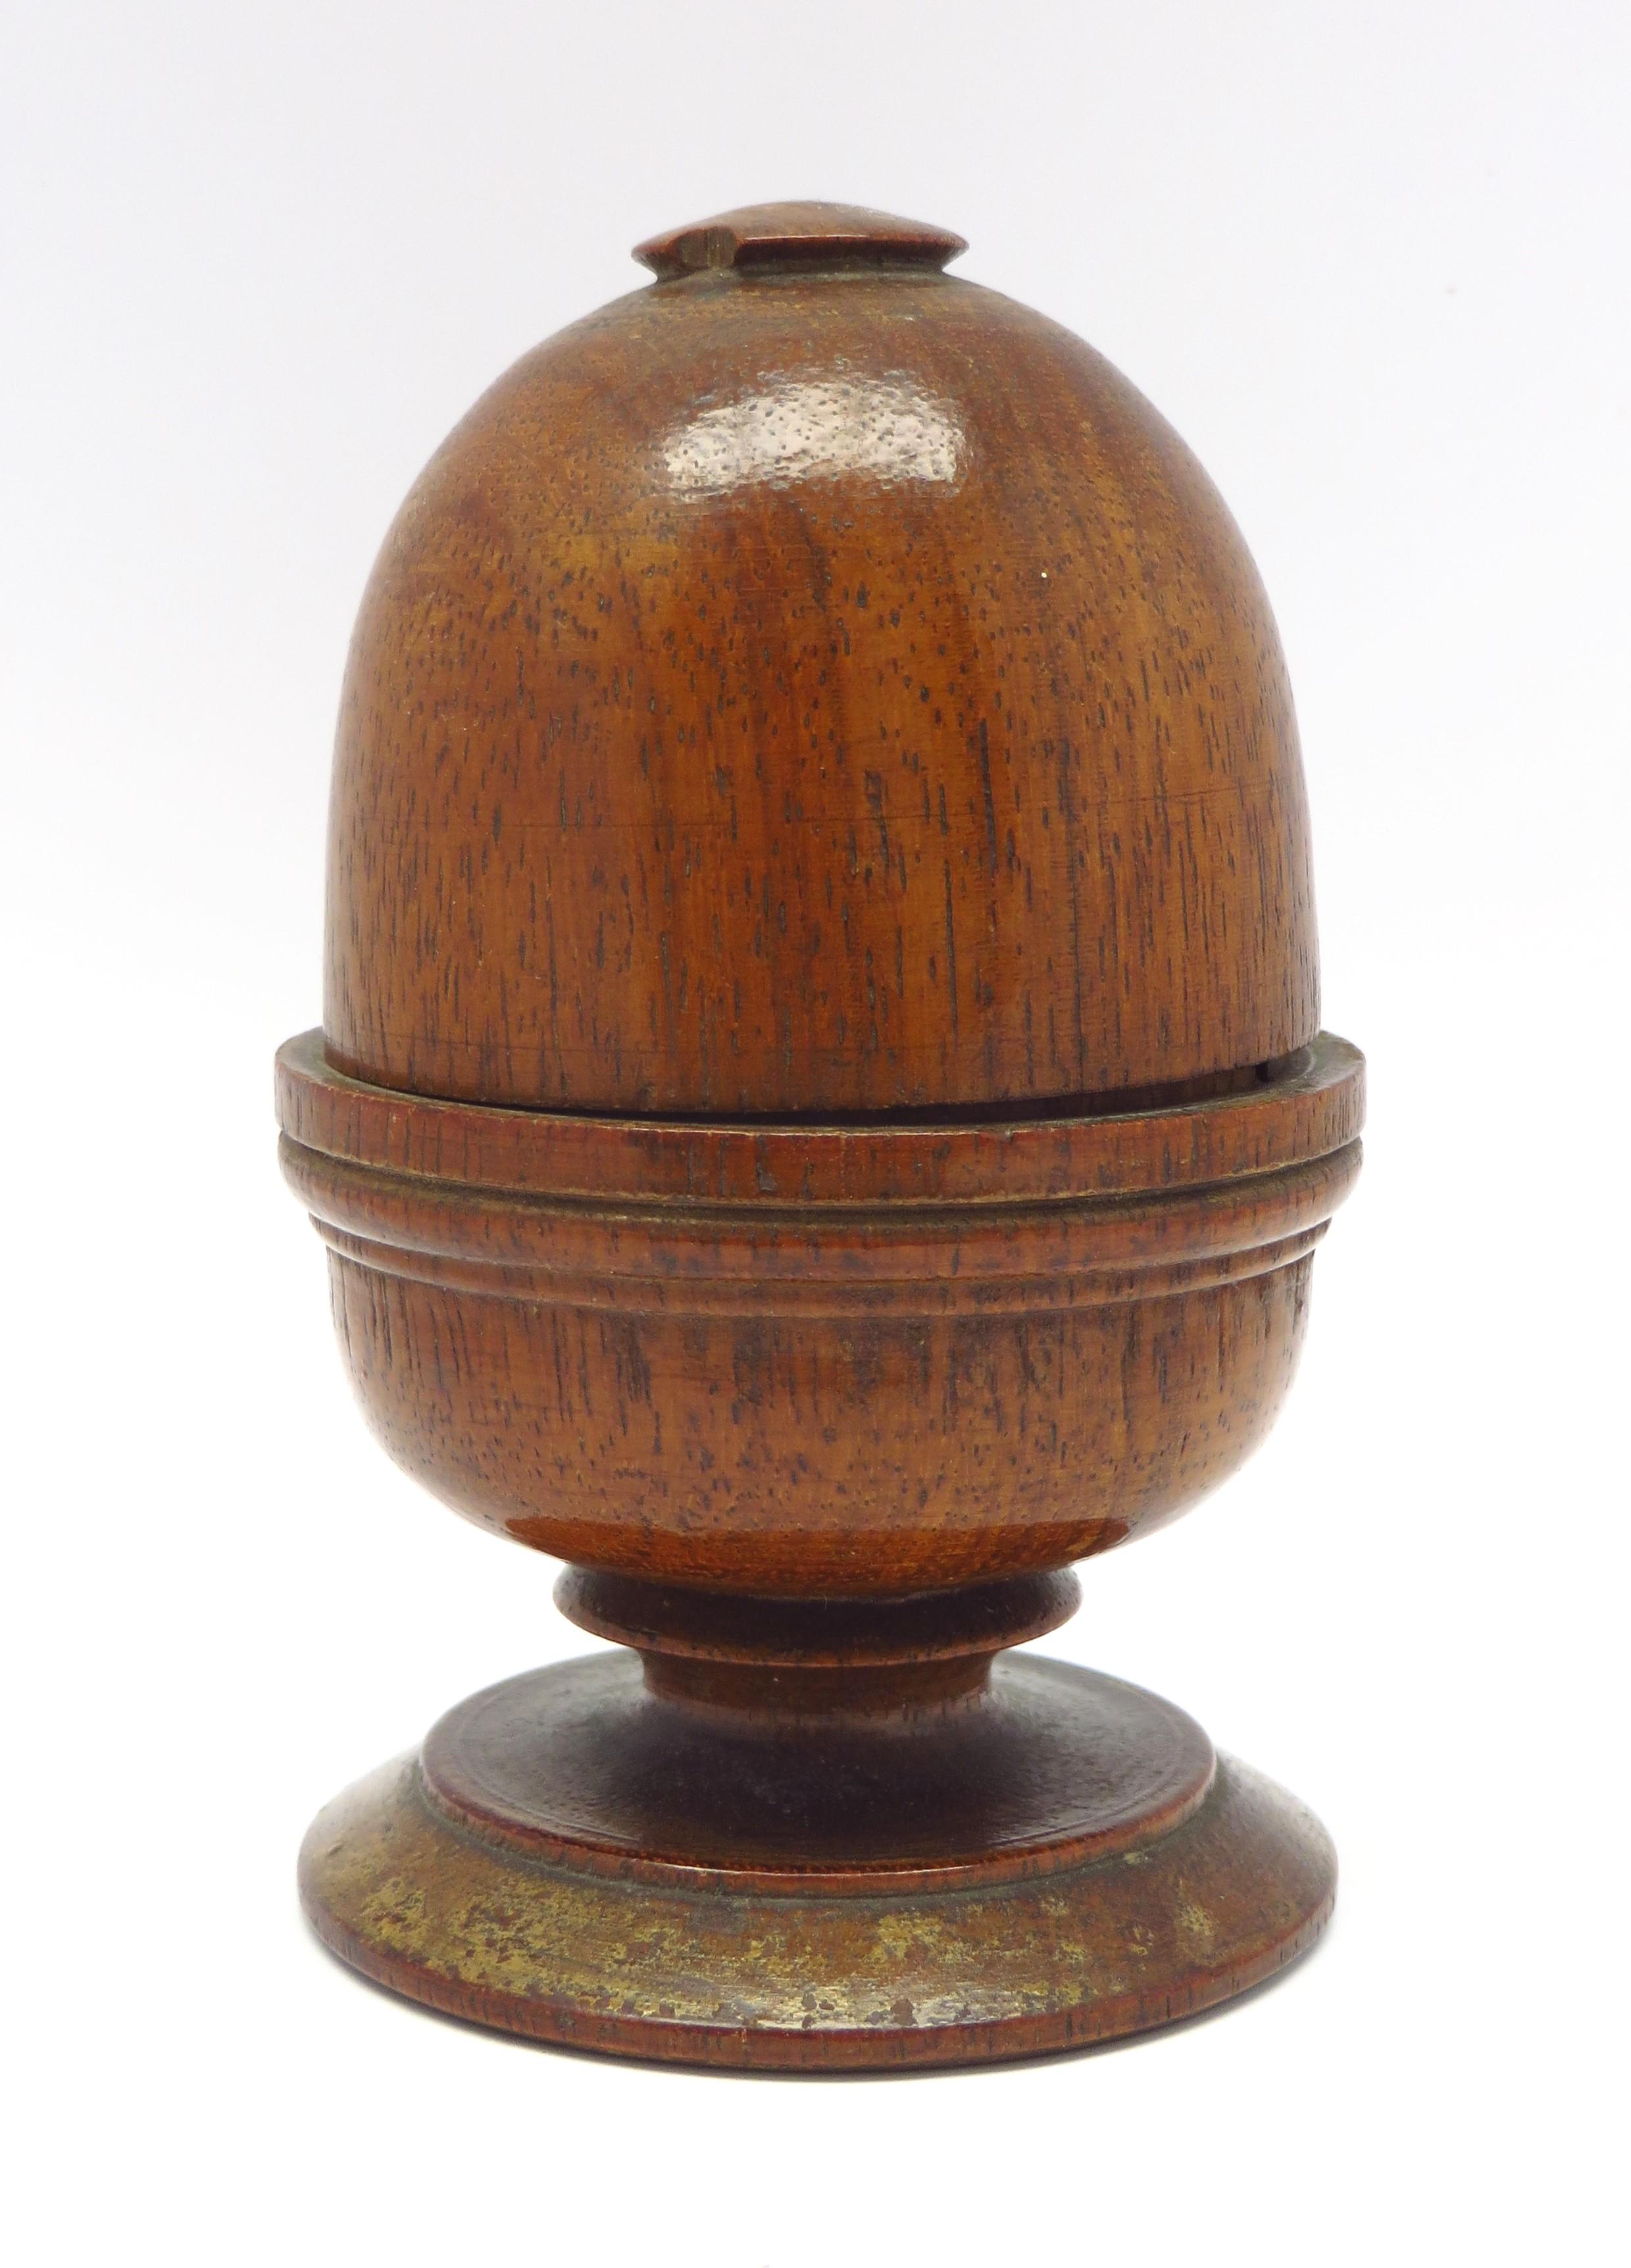 Newton & Son pocket globe

London, 1838

Miniature terrestrial globe with a diameter of 2 inches / 5 cm.

In a turned and stained beech two-section case, 3,95 inches / 10 cm. high.
